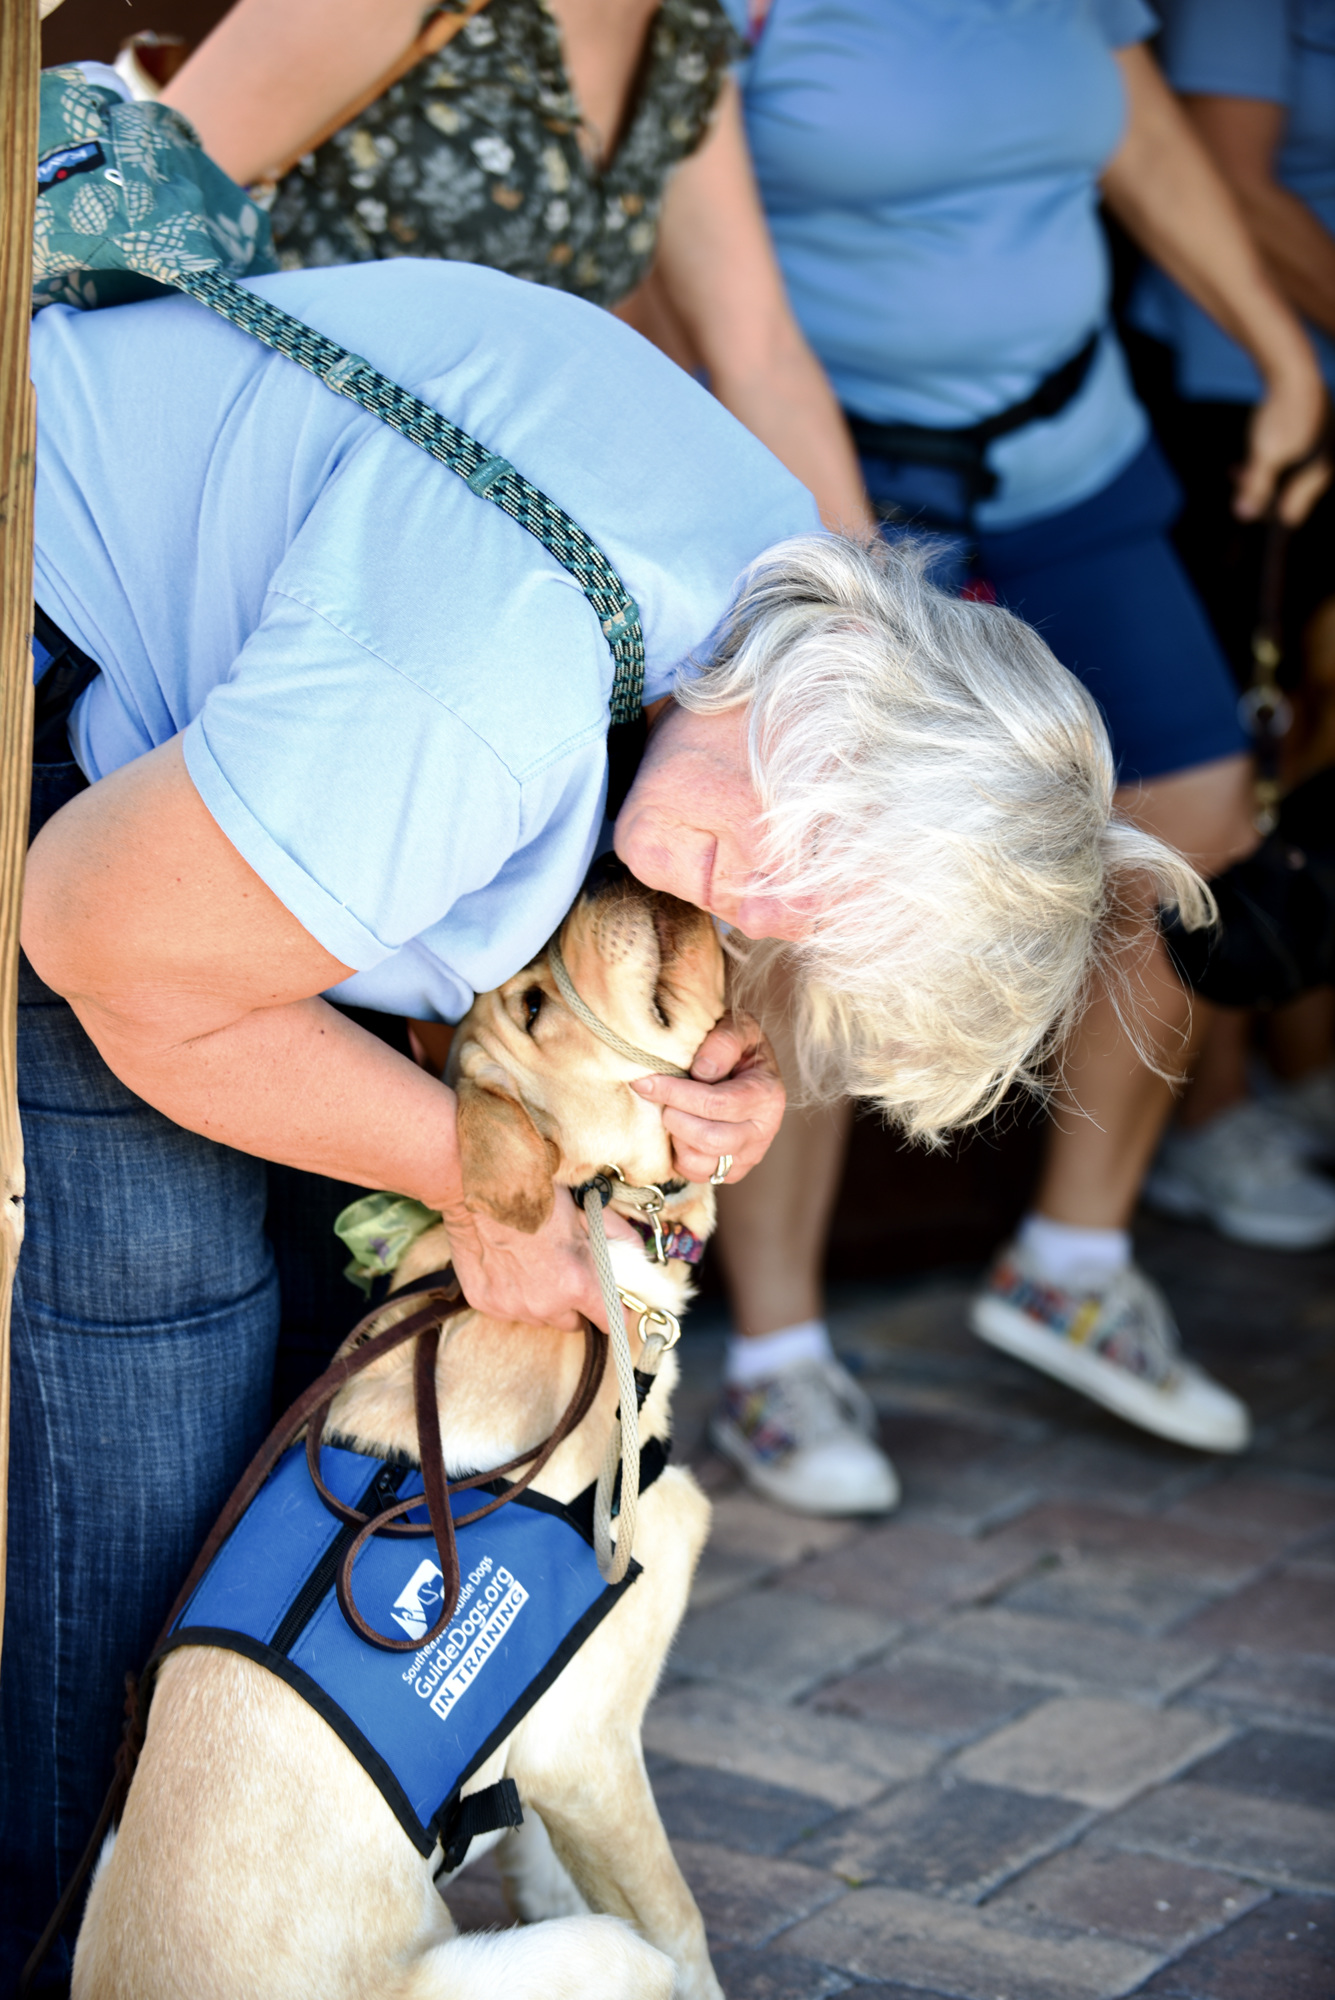 The Lakewood Ranch Puppy Raisers’ youngest trainee, 6-month-old Daisy, plants a wet kiss on puppy raiser Teresa Will. (Photo by Heidi Kurpiela)